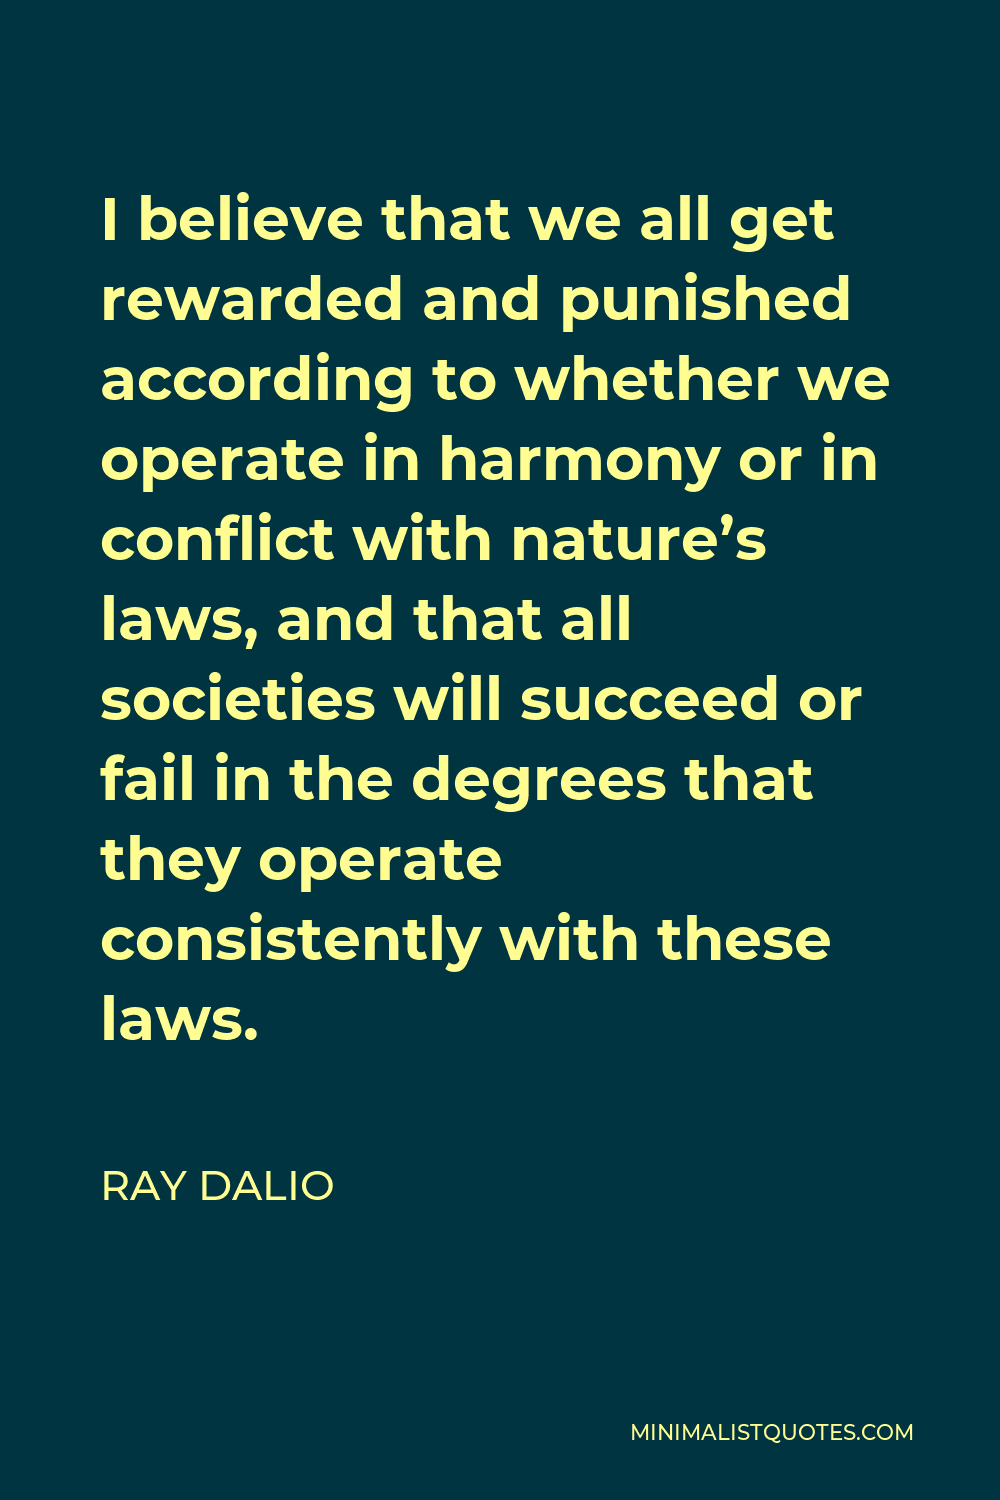 Ray Dalio Quote - I believe that we all get rewarded and punished according to whether we operate in harmony or in conflict with nature’s laws, and that all societies will succeed or fail in the degrees that they operate consistently with these laws.